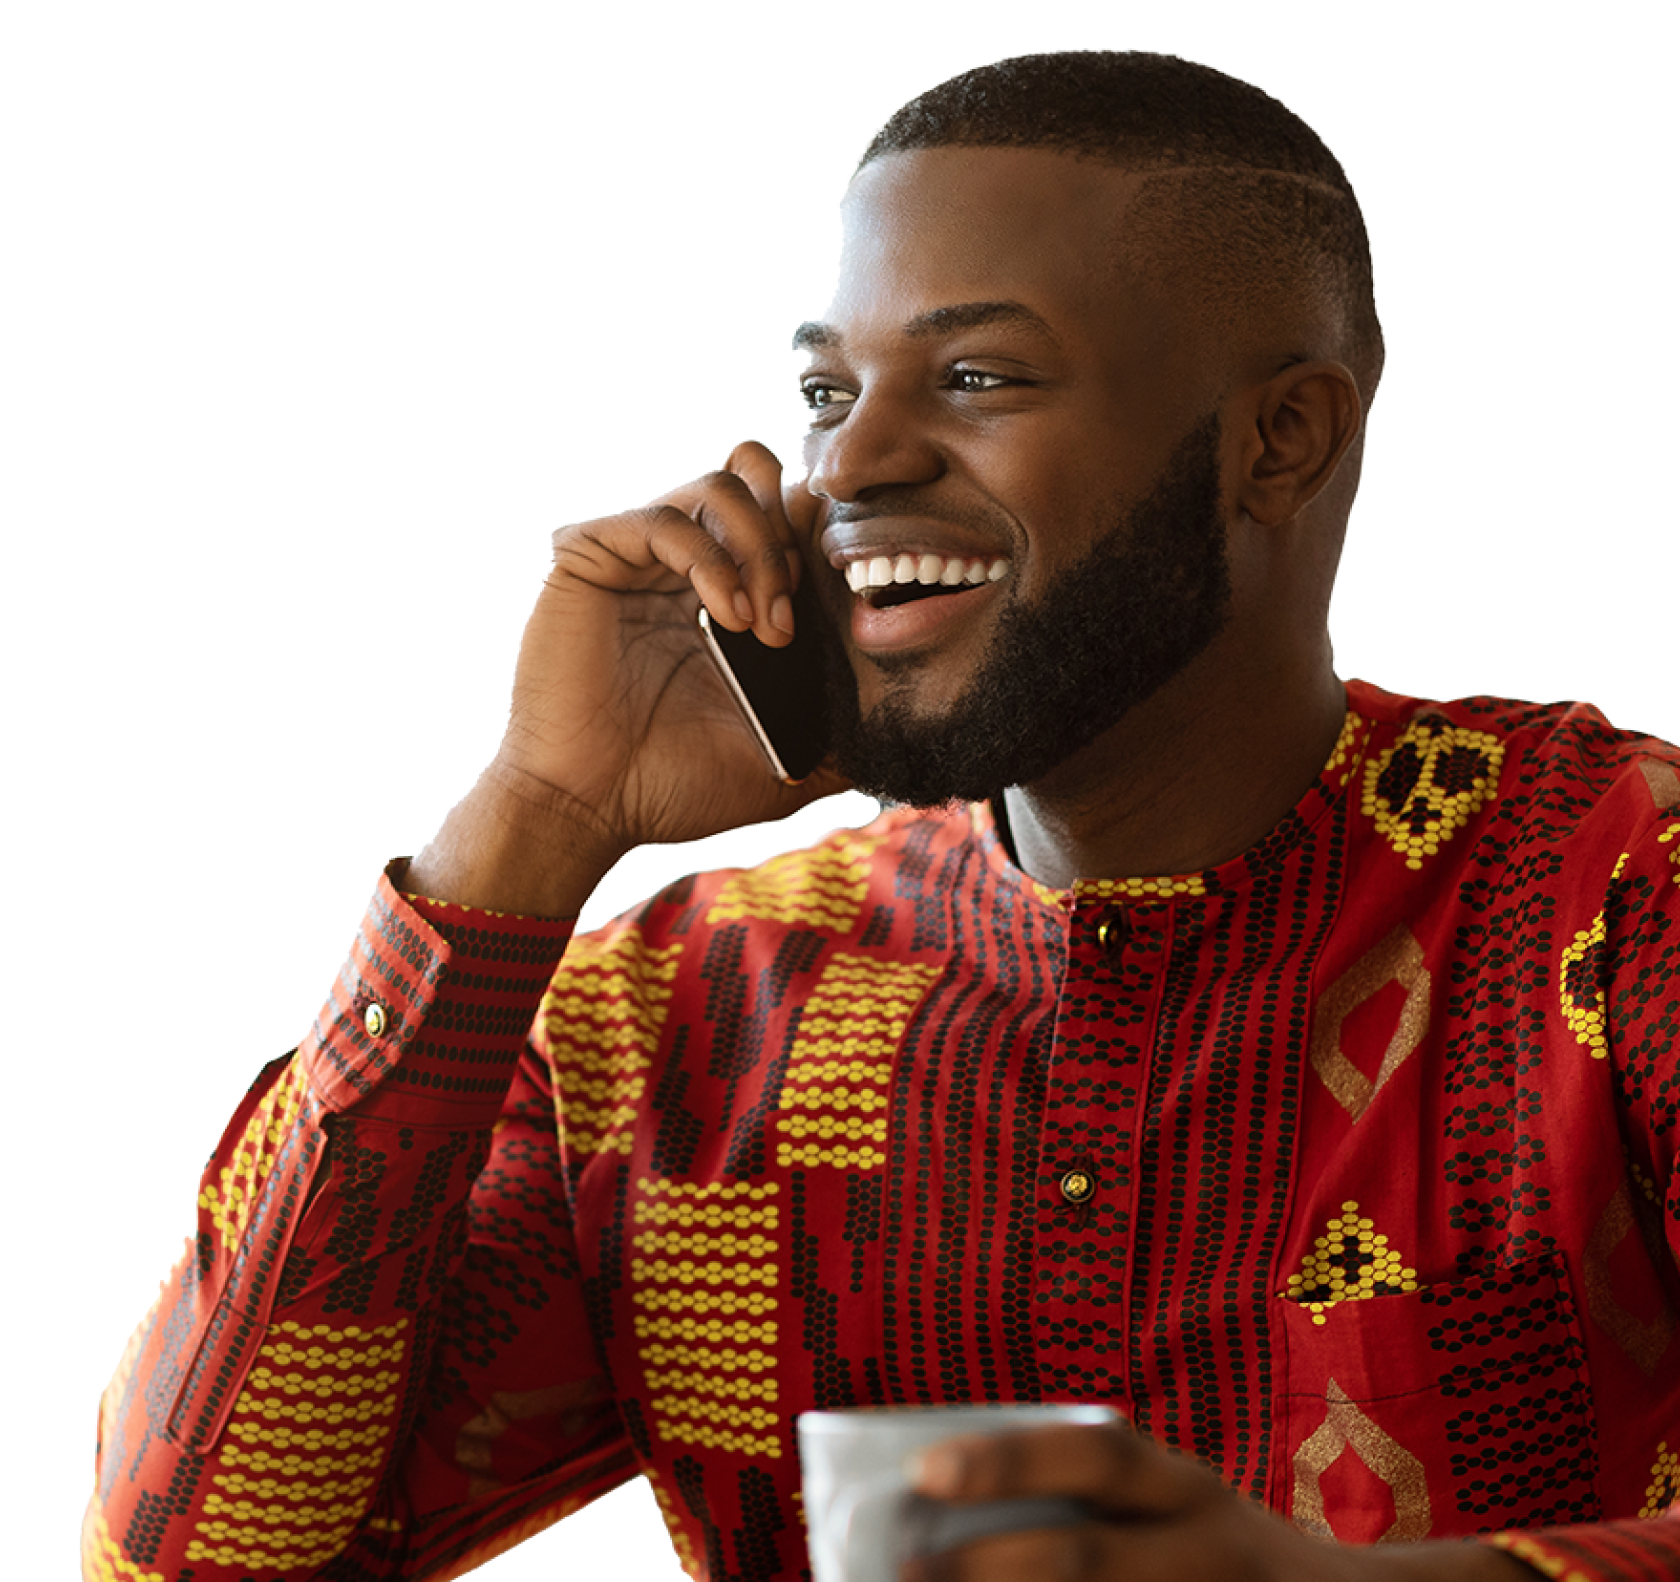 man smiling on the phone with a coffee in his hand